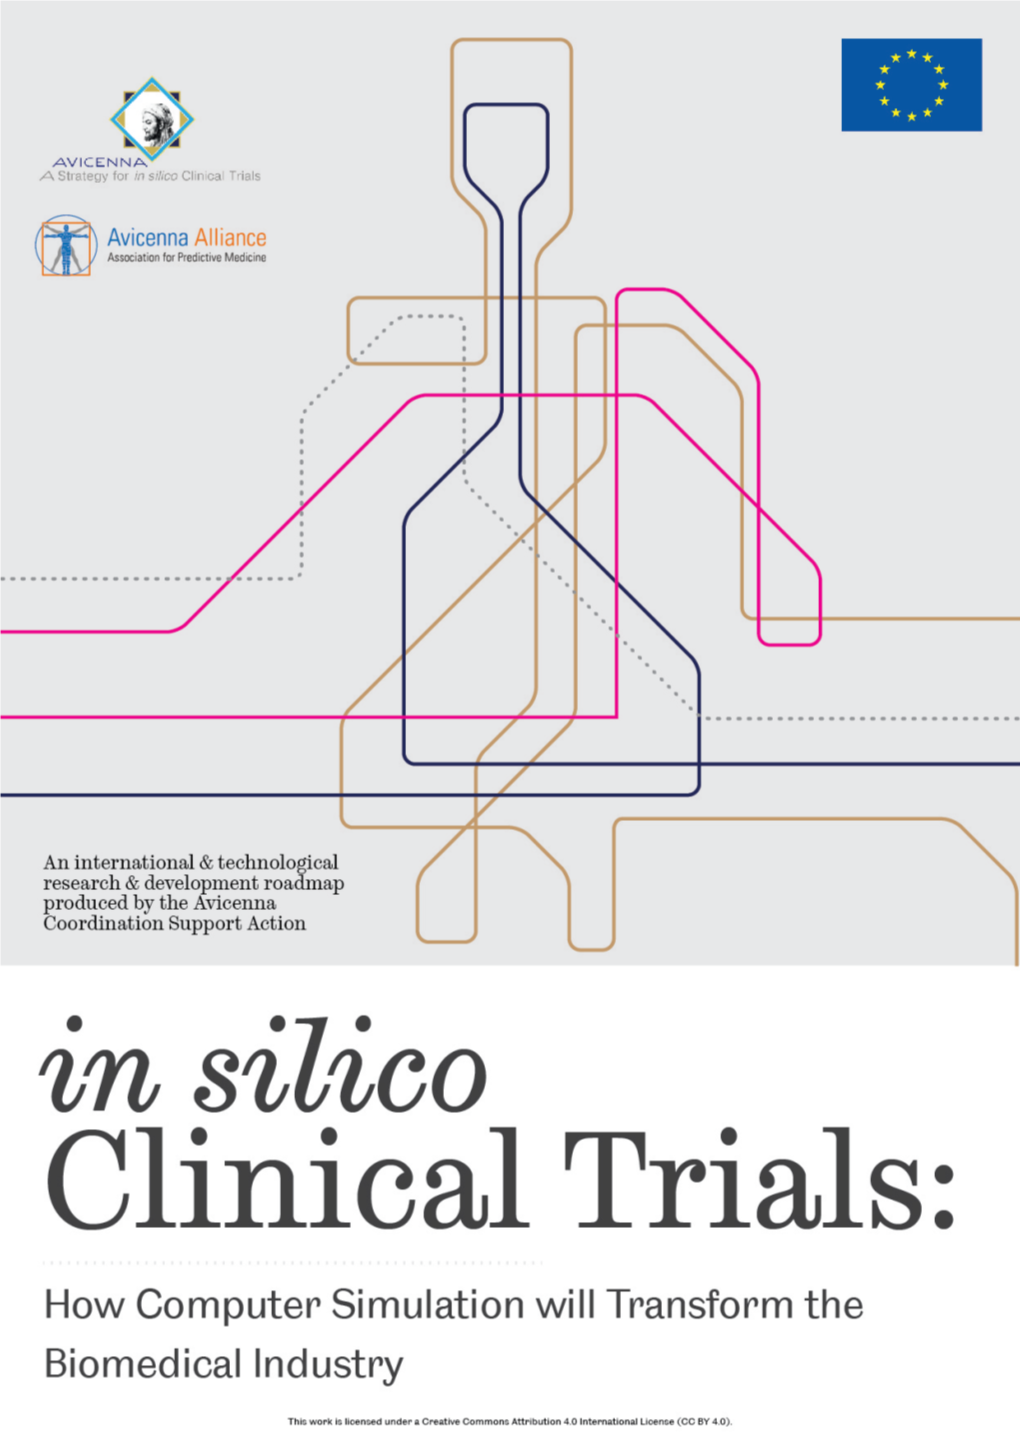 Clinical Trials to Enhance Drug Safety and Efficacy Assessment